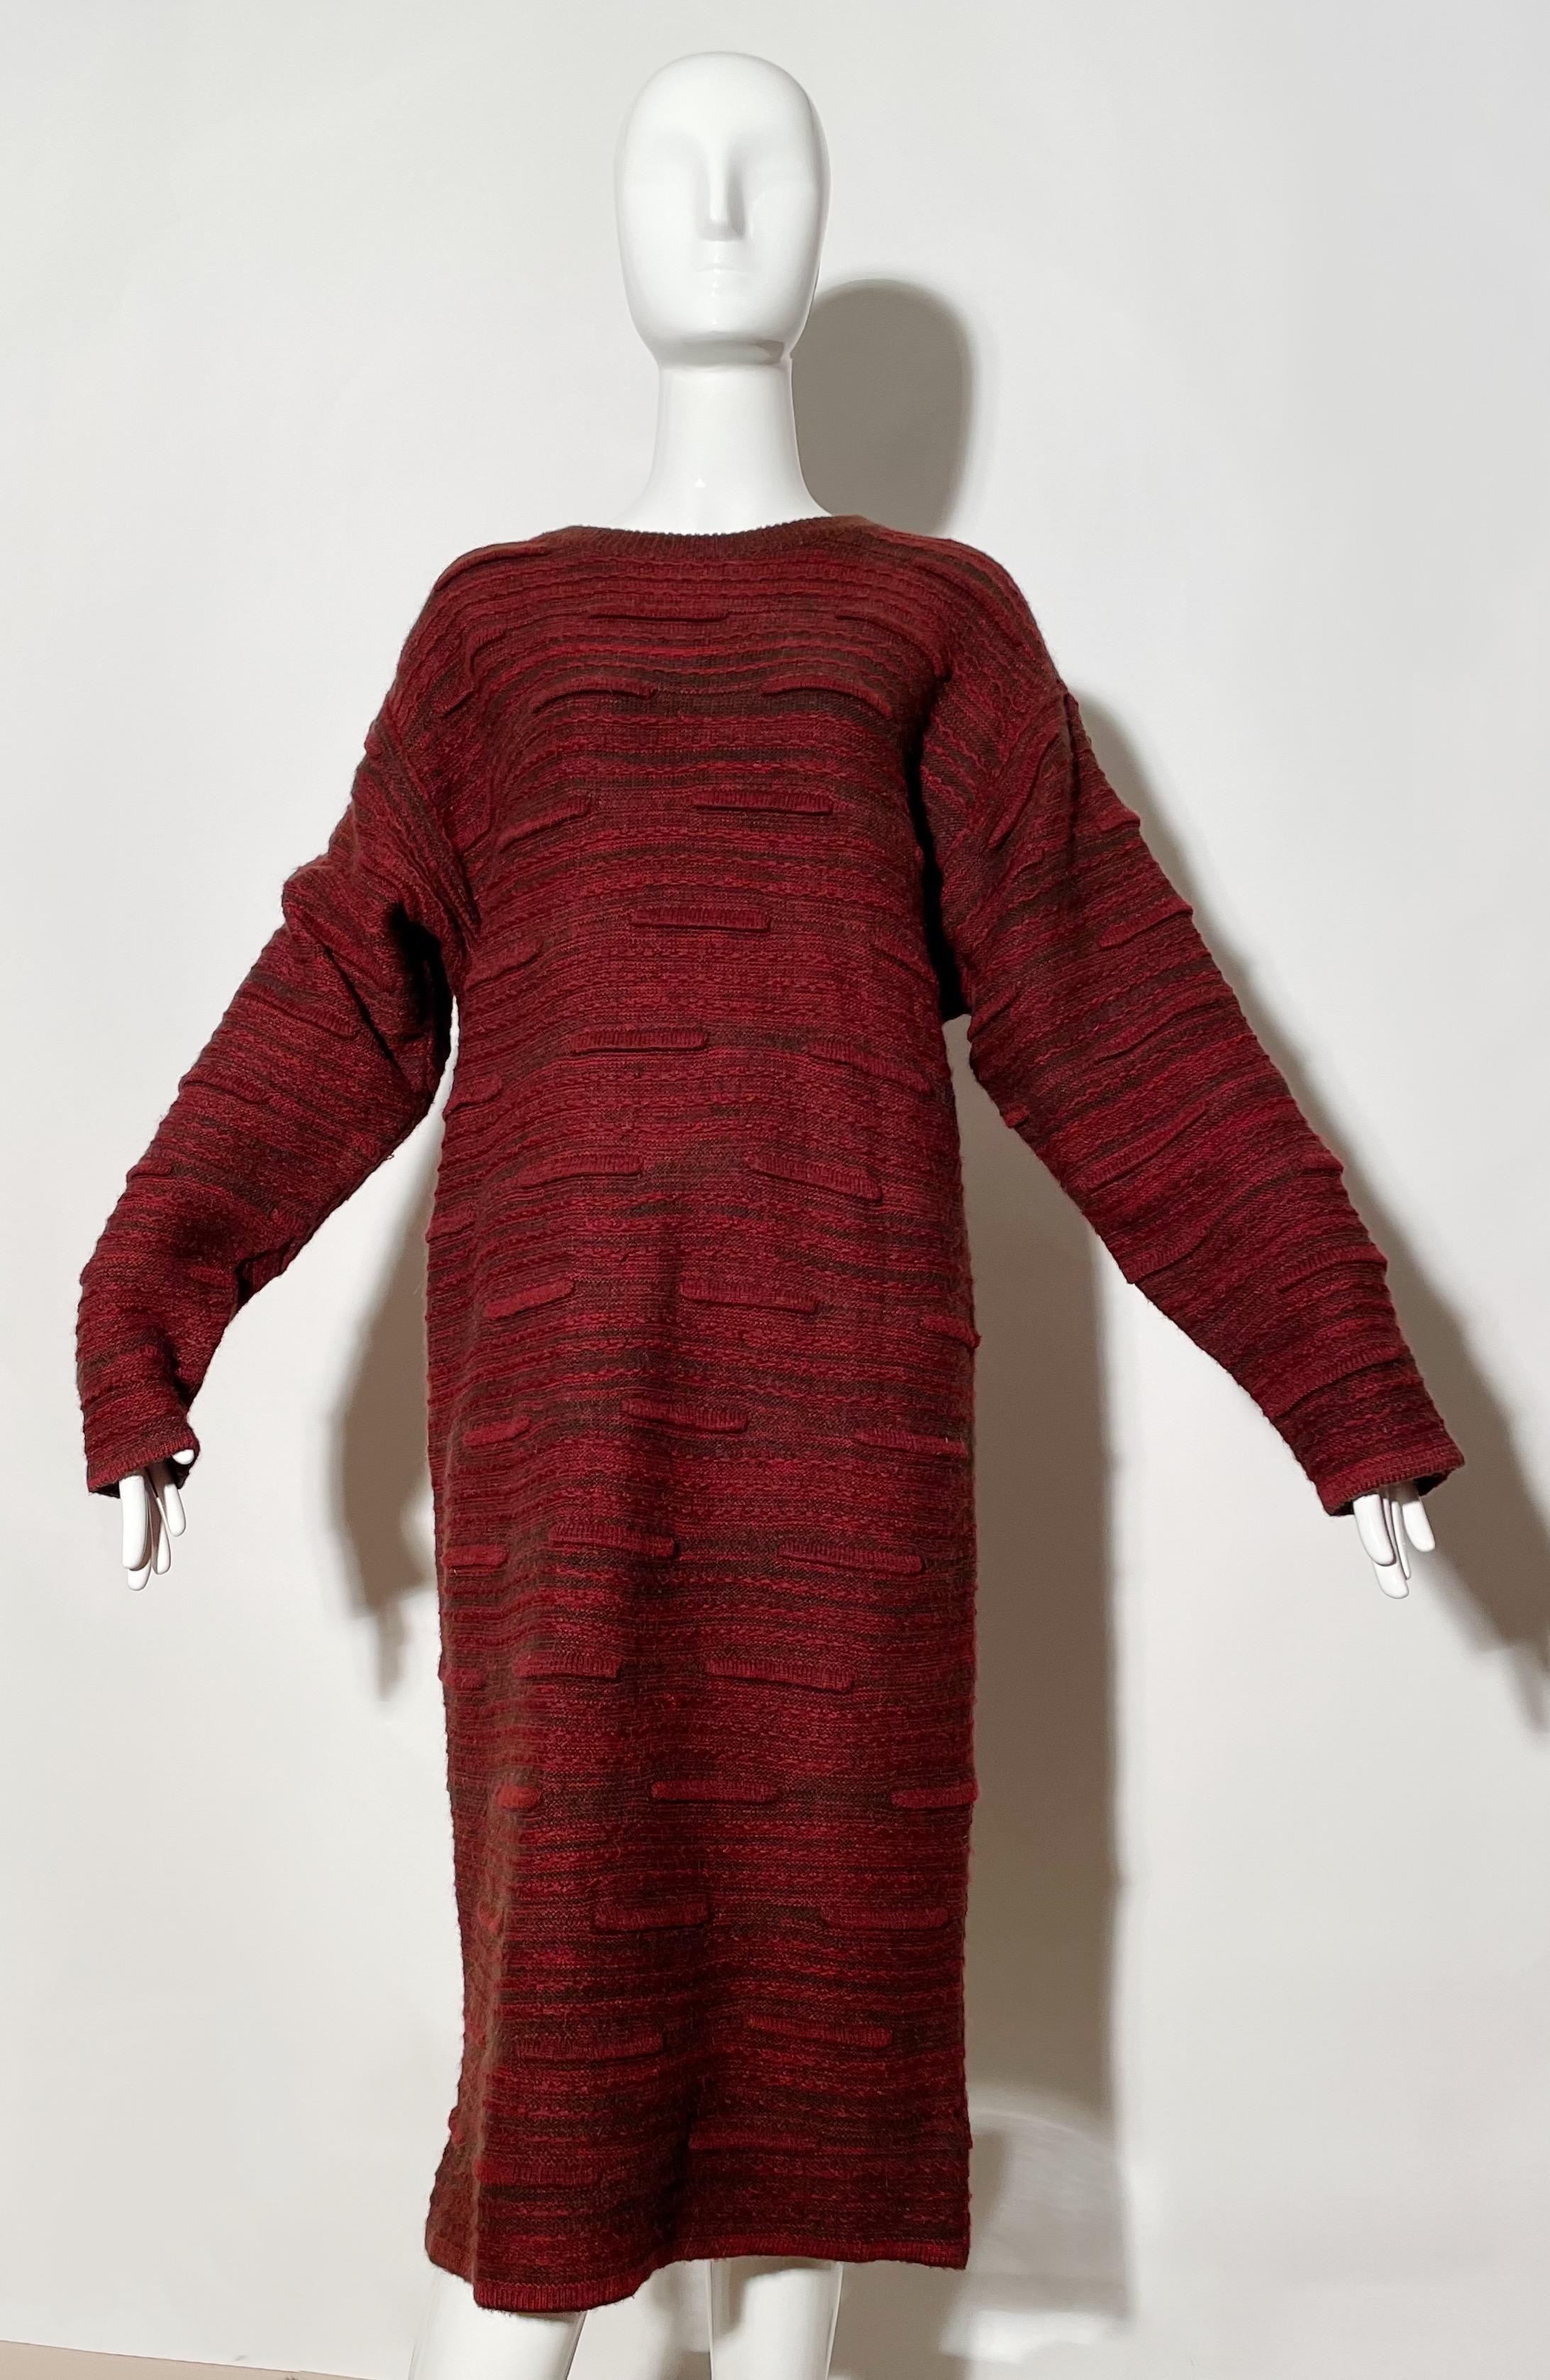 Longsleeve knit sweaterdress. Wool. Made in Japan.

*Condition: great vintage condition, one snag ( as pictured).


Measurements Taken Laying Flat (inches)—
Shoulder to Shoulder: 21 in.
Sleeve Length: 22.5 in.
Bust: 42 in.
Waist: 42 in.
Length: 44